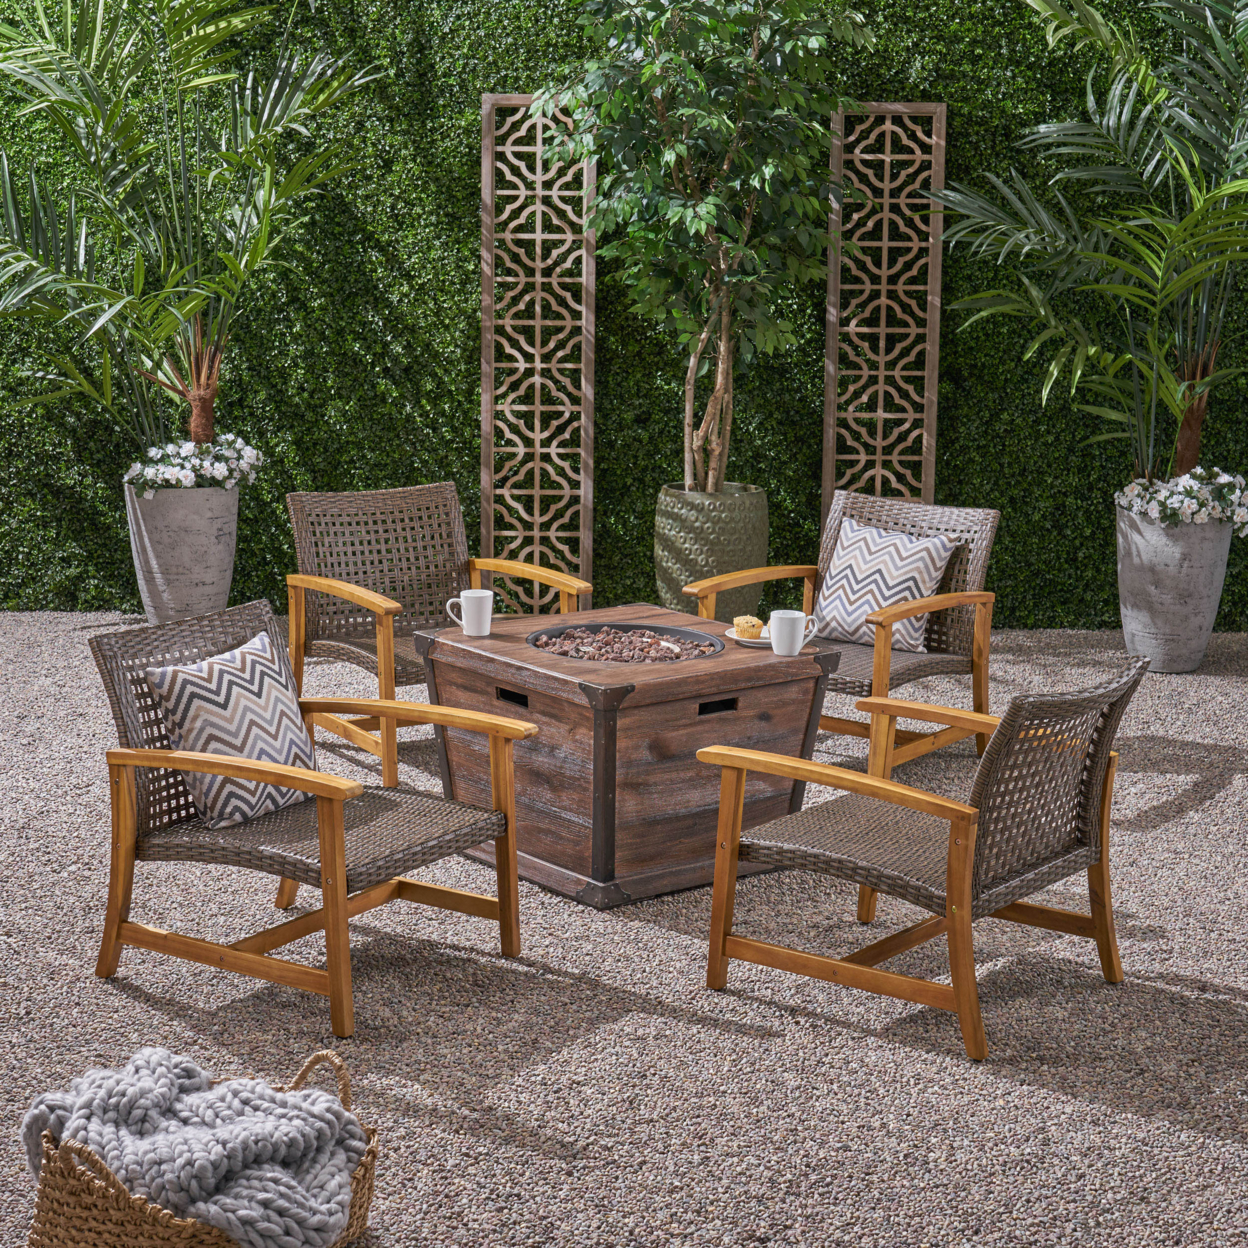 Levant Outdoor 4 Piece Wood And Wicker Club Chair Set With Fire Pit - Natural / Mixed Mocha